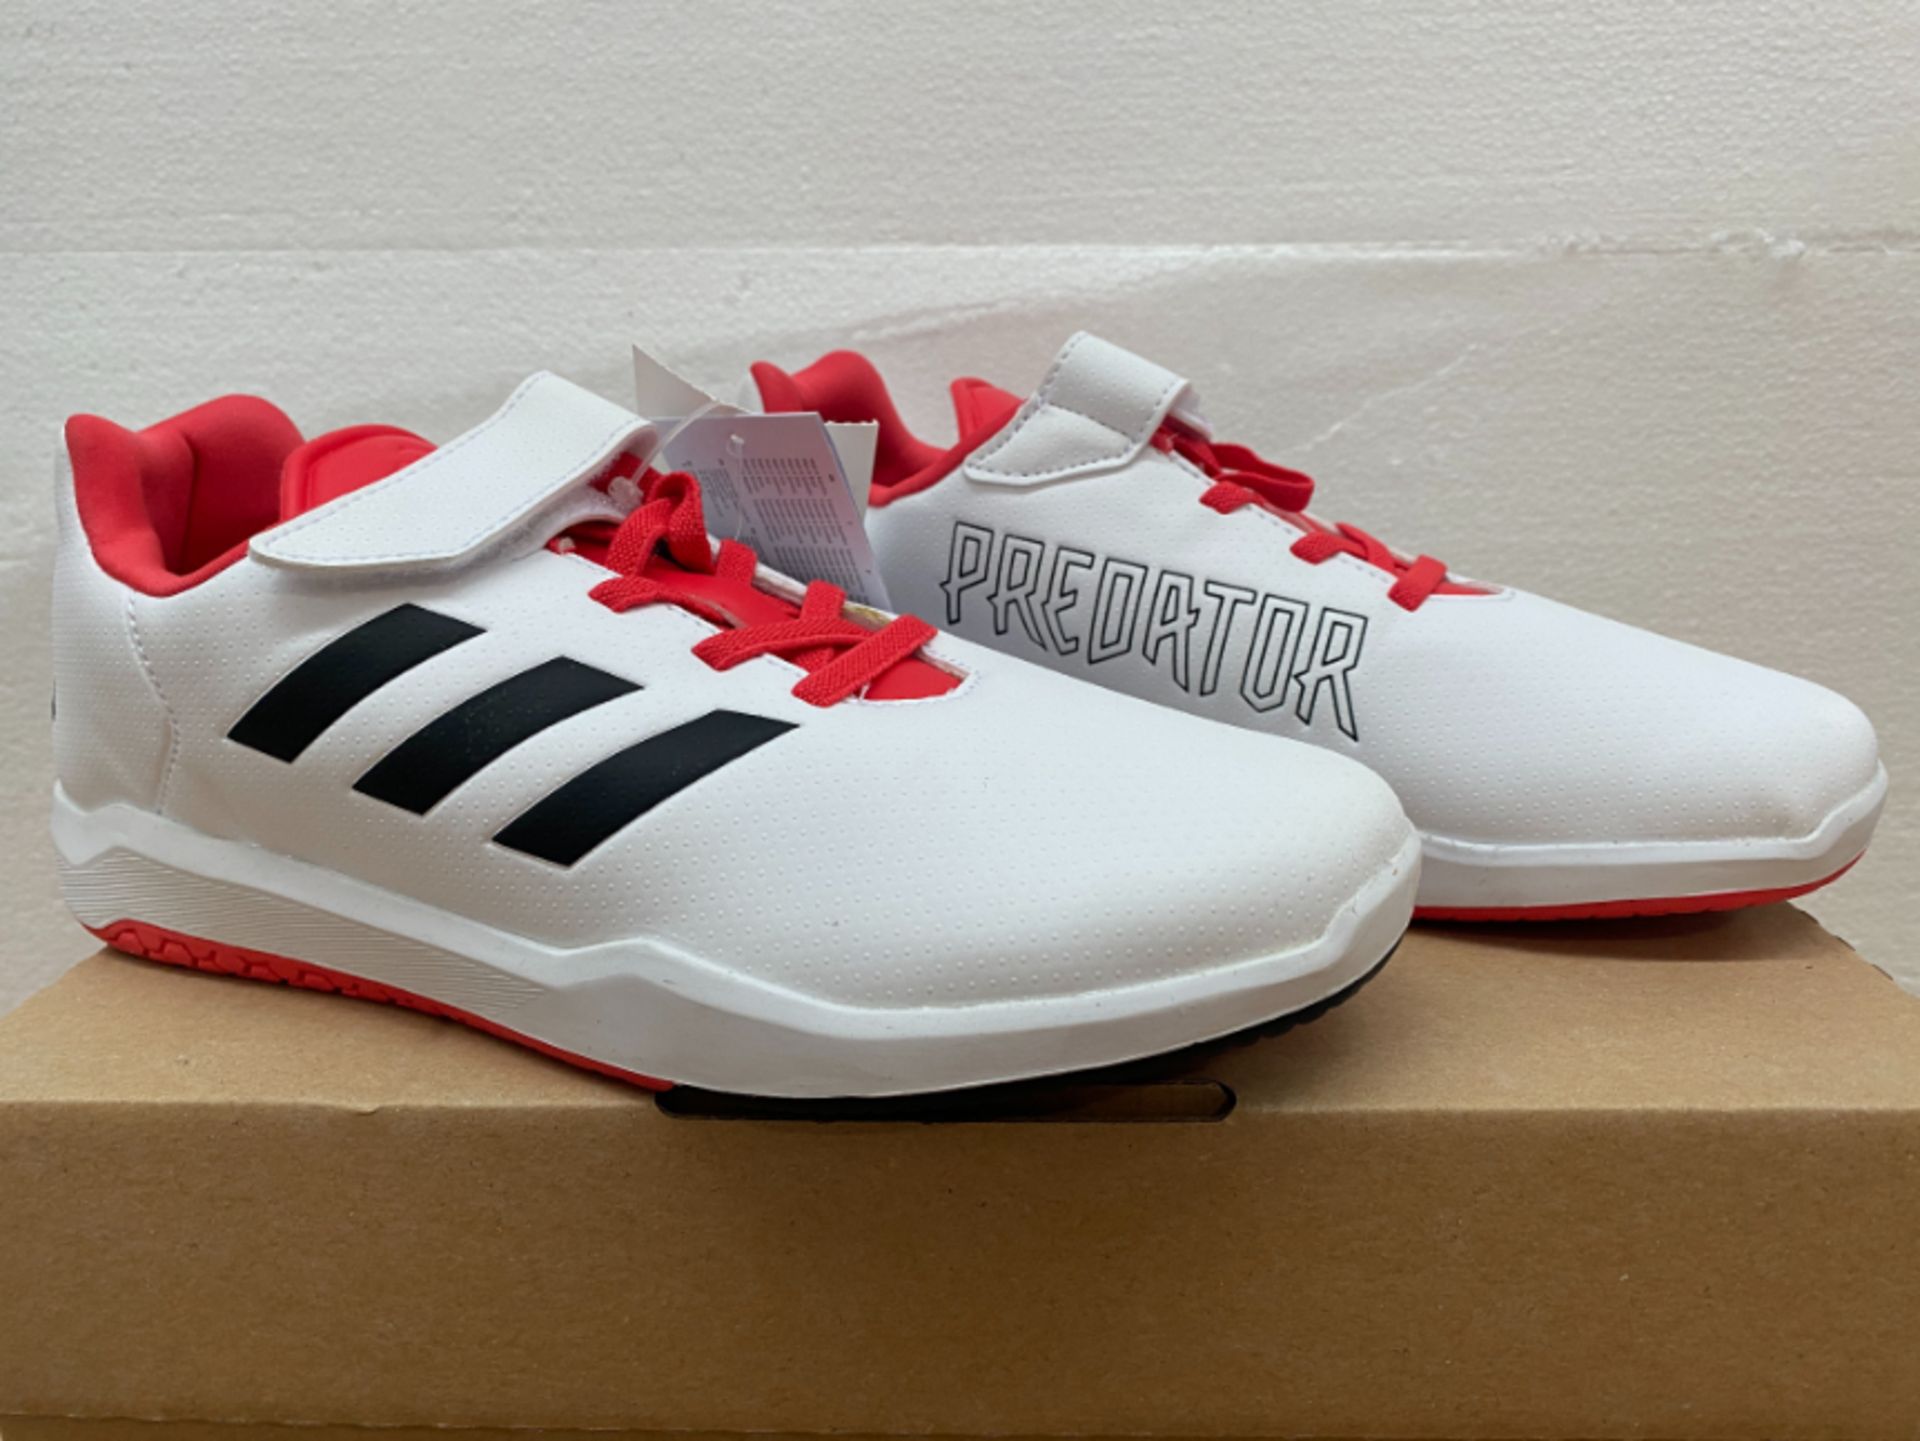 1 LOT TO CONTAIN AN AS NEW BOXED PAIR OF ADIDAS UK SIZE 5 ALTA TURF PREDITOR TRAINER IN WHITE